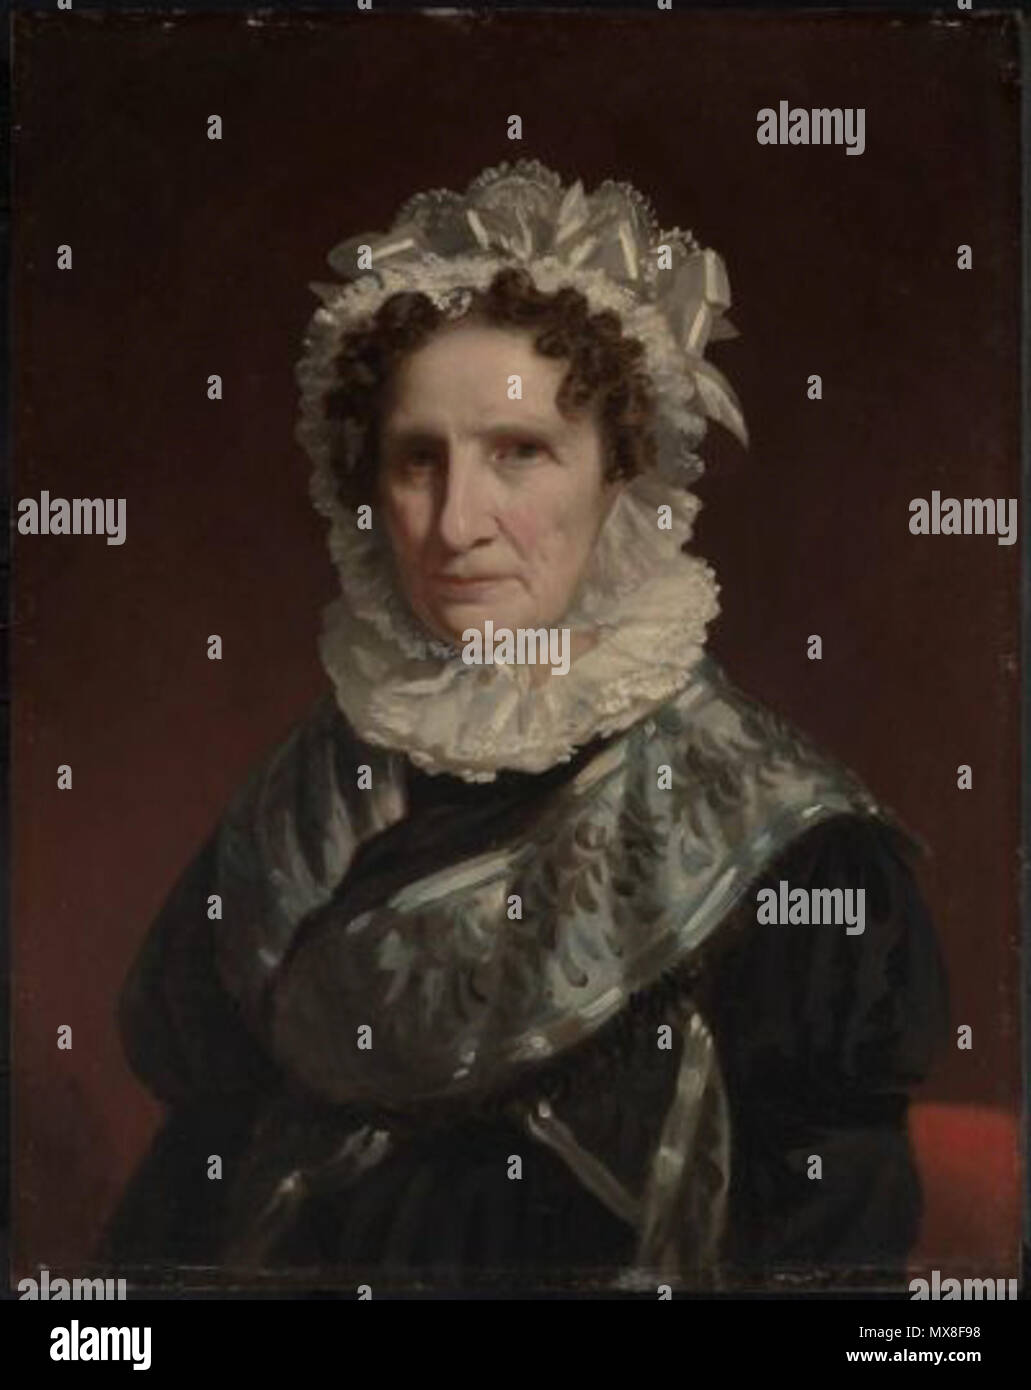 . Madam Powel (Elizabeth Willing). about 1825. By Francis Alexander, American, 1800–1880. 76.52 x 60.32 cm (30 1/8 x 23 3/4 in.). Oil on panel. Museum of Fine Arts, Boston. 1825.   Francis Alexander  (1800–1880)     Description American painter  Date of birth/death 3 February 1800 27 March 1880  Location of birth/death Killingly Florence  Authority control  : Q5479973 VIAF: 44154388 ISNI: 0000 0000 6706 3648 ULAN: 500001550 LCCN: nr91025186 GND: 171958527 WorldCat 185 ElizabethWilling ca1825 byFrancisAlexander MFABoston Stock Photo